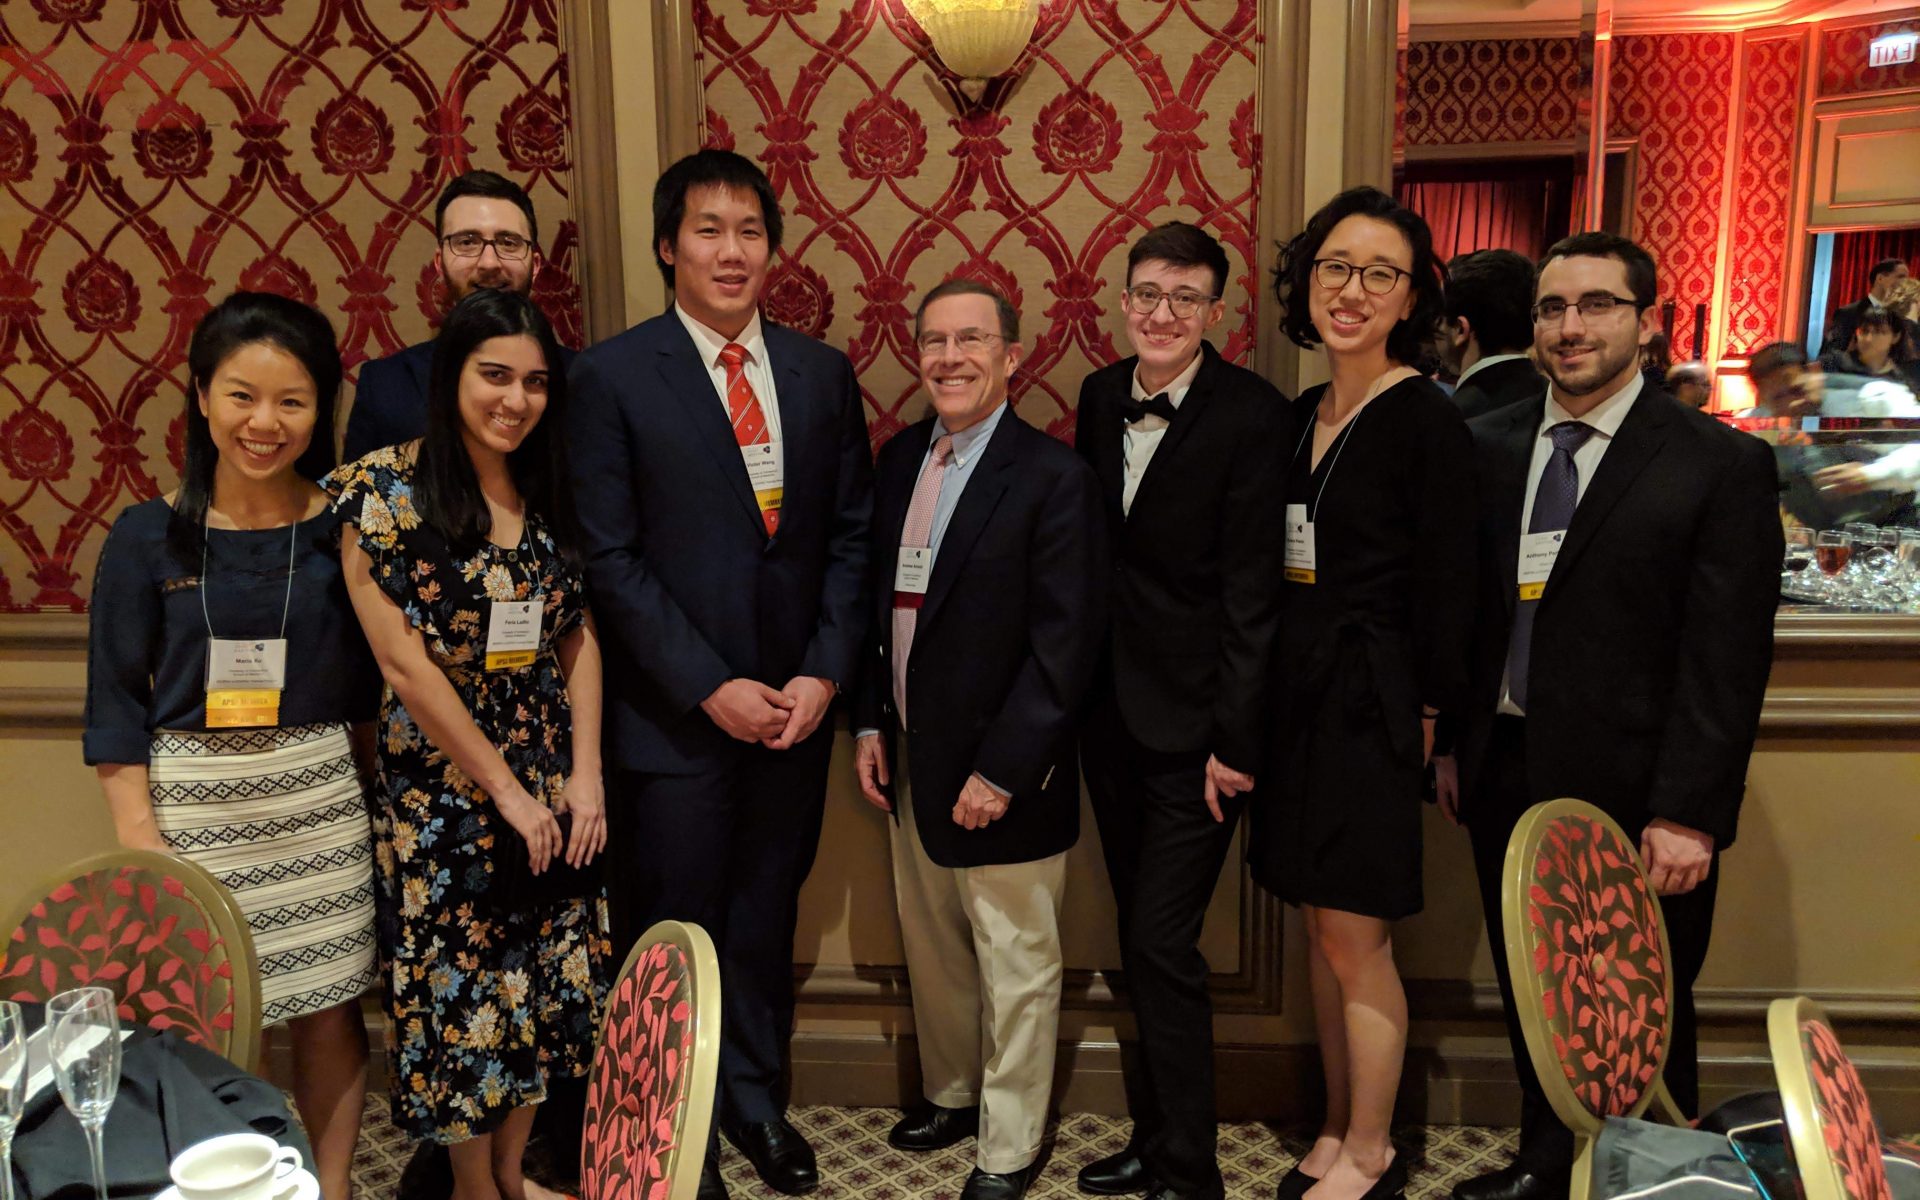 UConn MD/PhD students standing together smiling, nicely dressed in a fancy ballroom